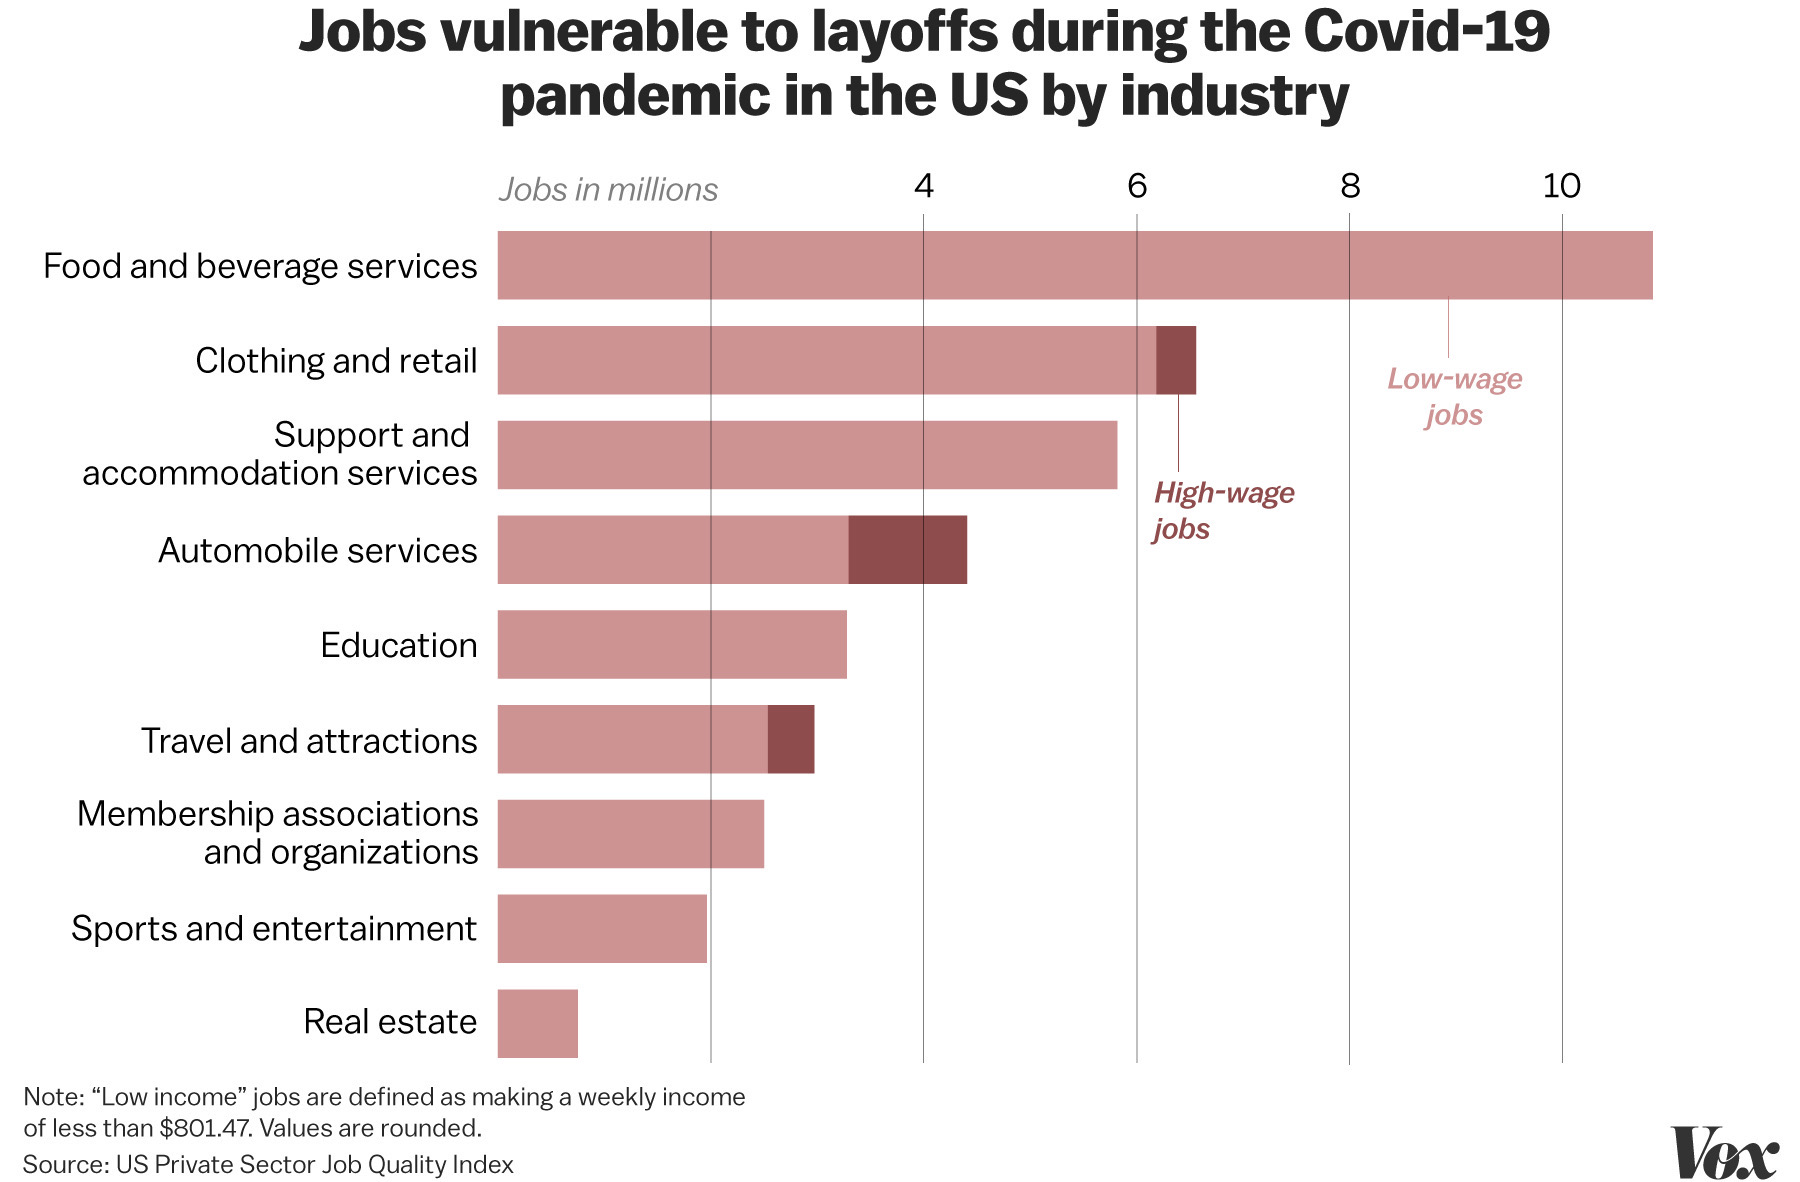 Jobs most vulnerable to layoffs during COVID-19 coronavirus pandemic 